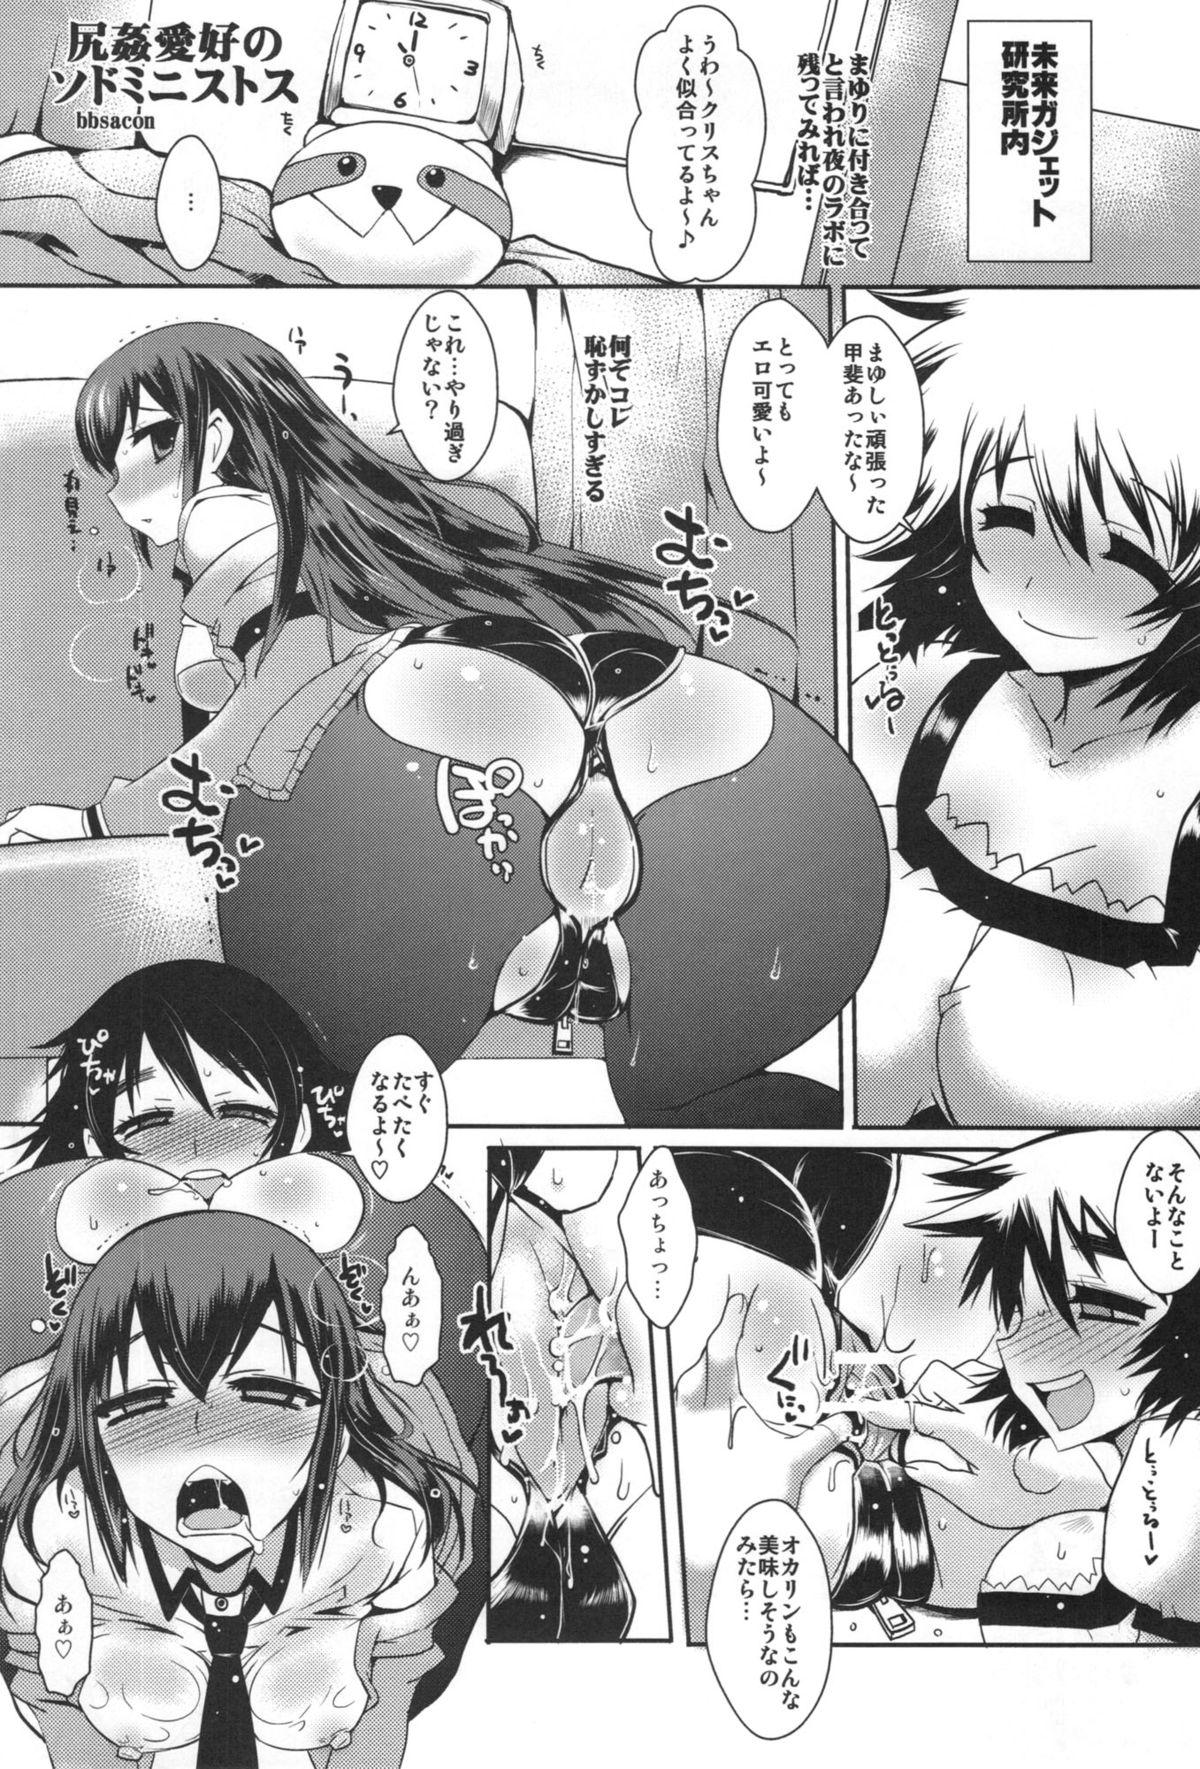 Muscles Shirikan Aikou no Sodominists - Steinsgate Big Cock - Page 4